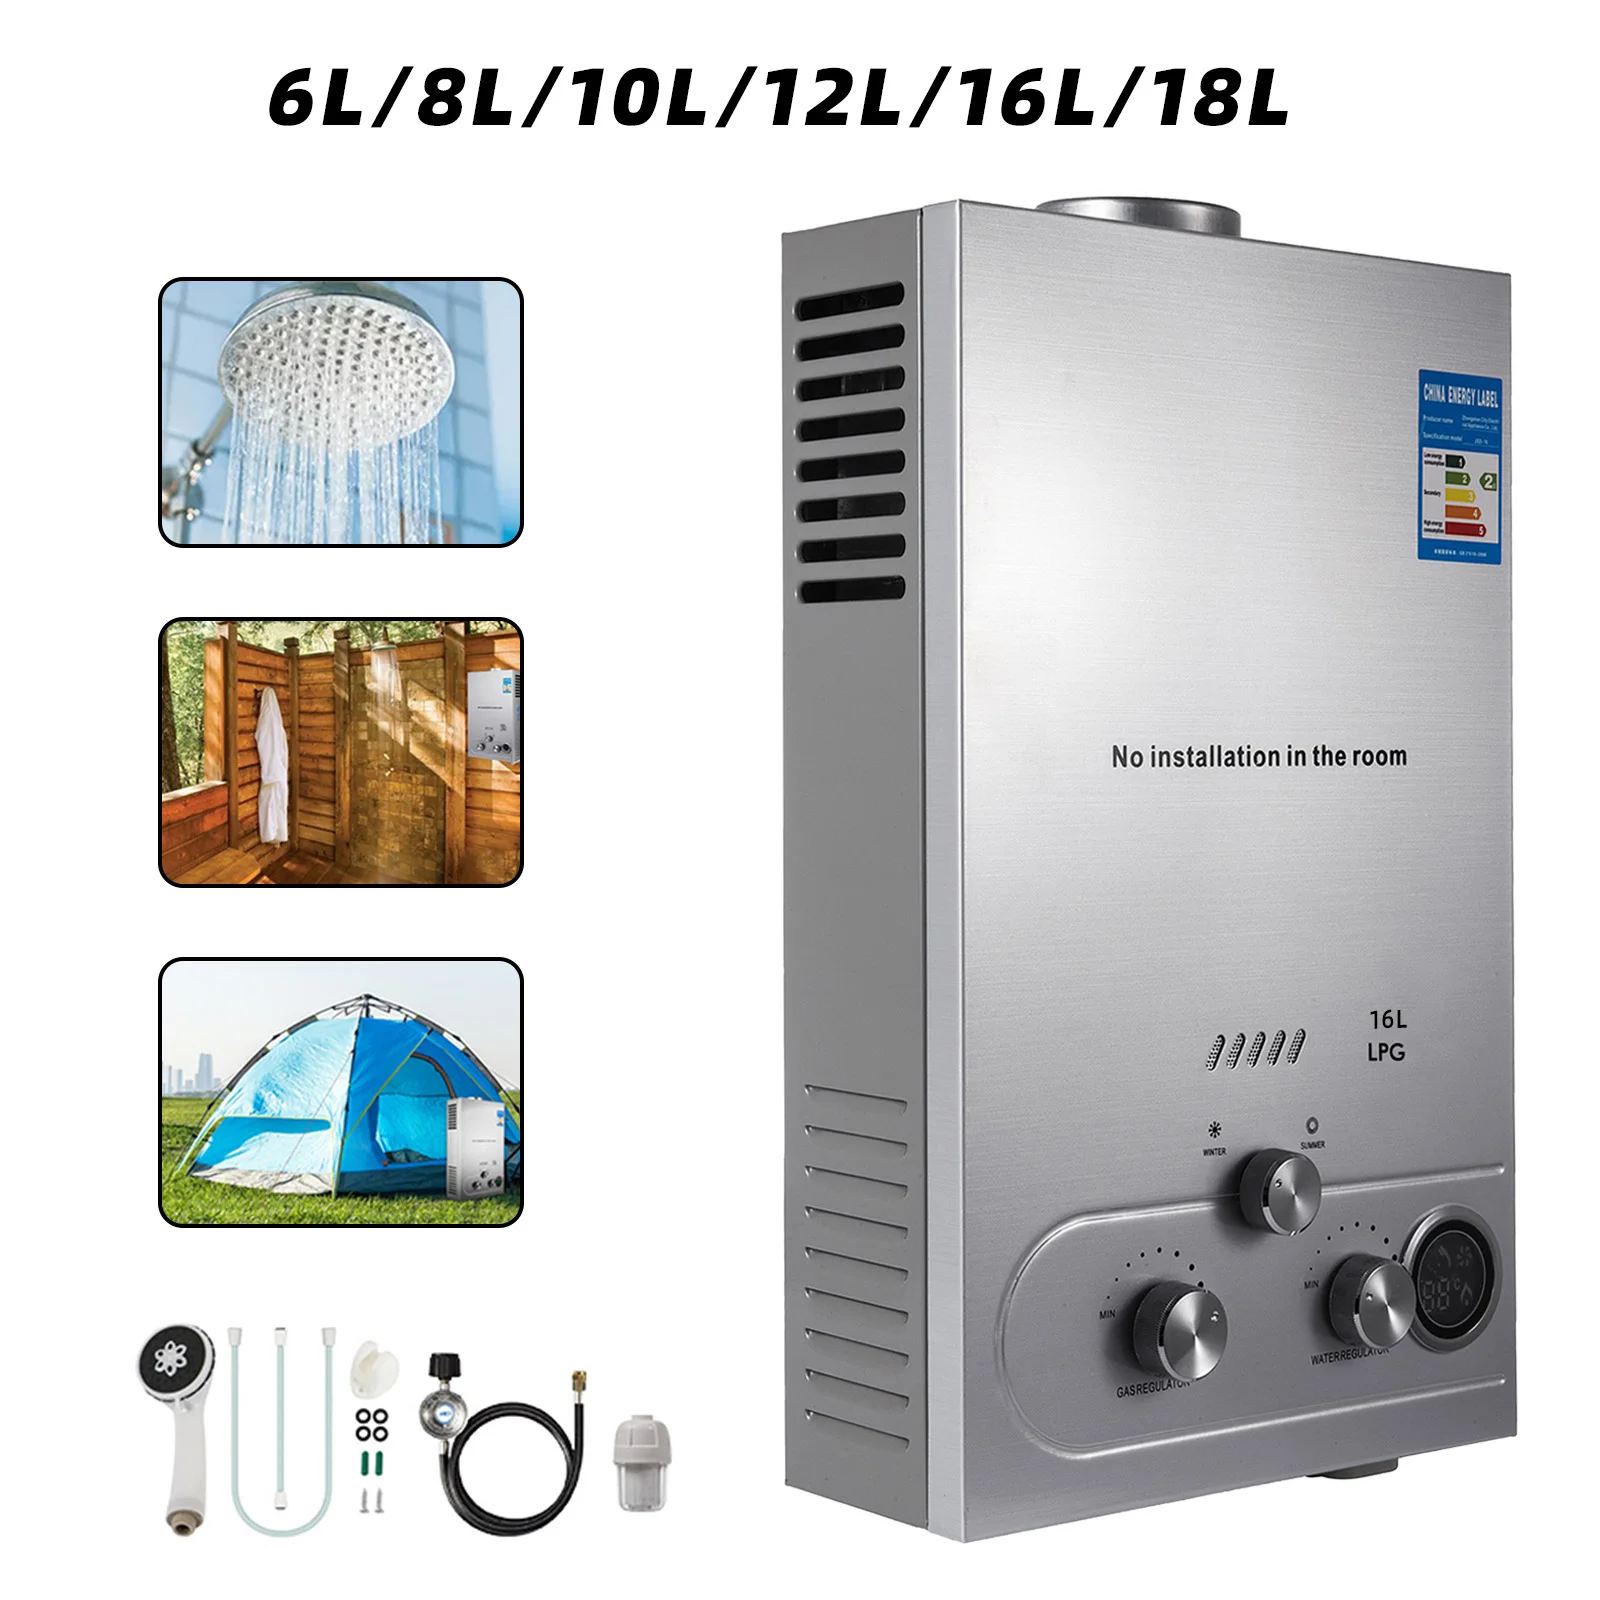 Tankless Propane Water Heater Propane 4.8GPM 36 KW Stainless Steel on Demand Water Heater Fit for Home Outdoor RV Use